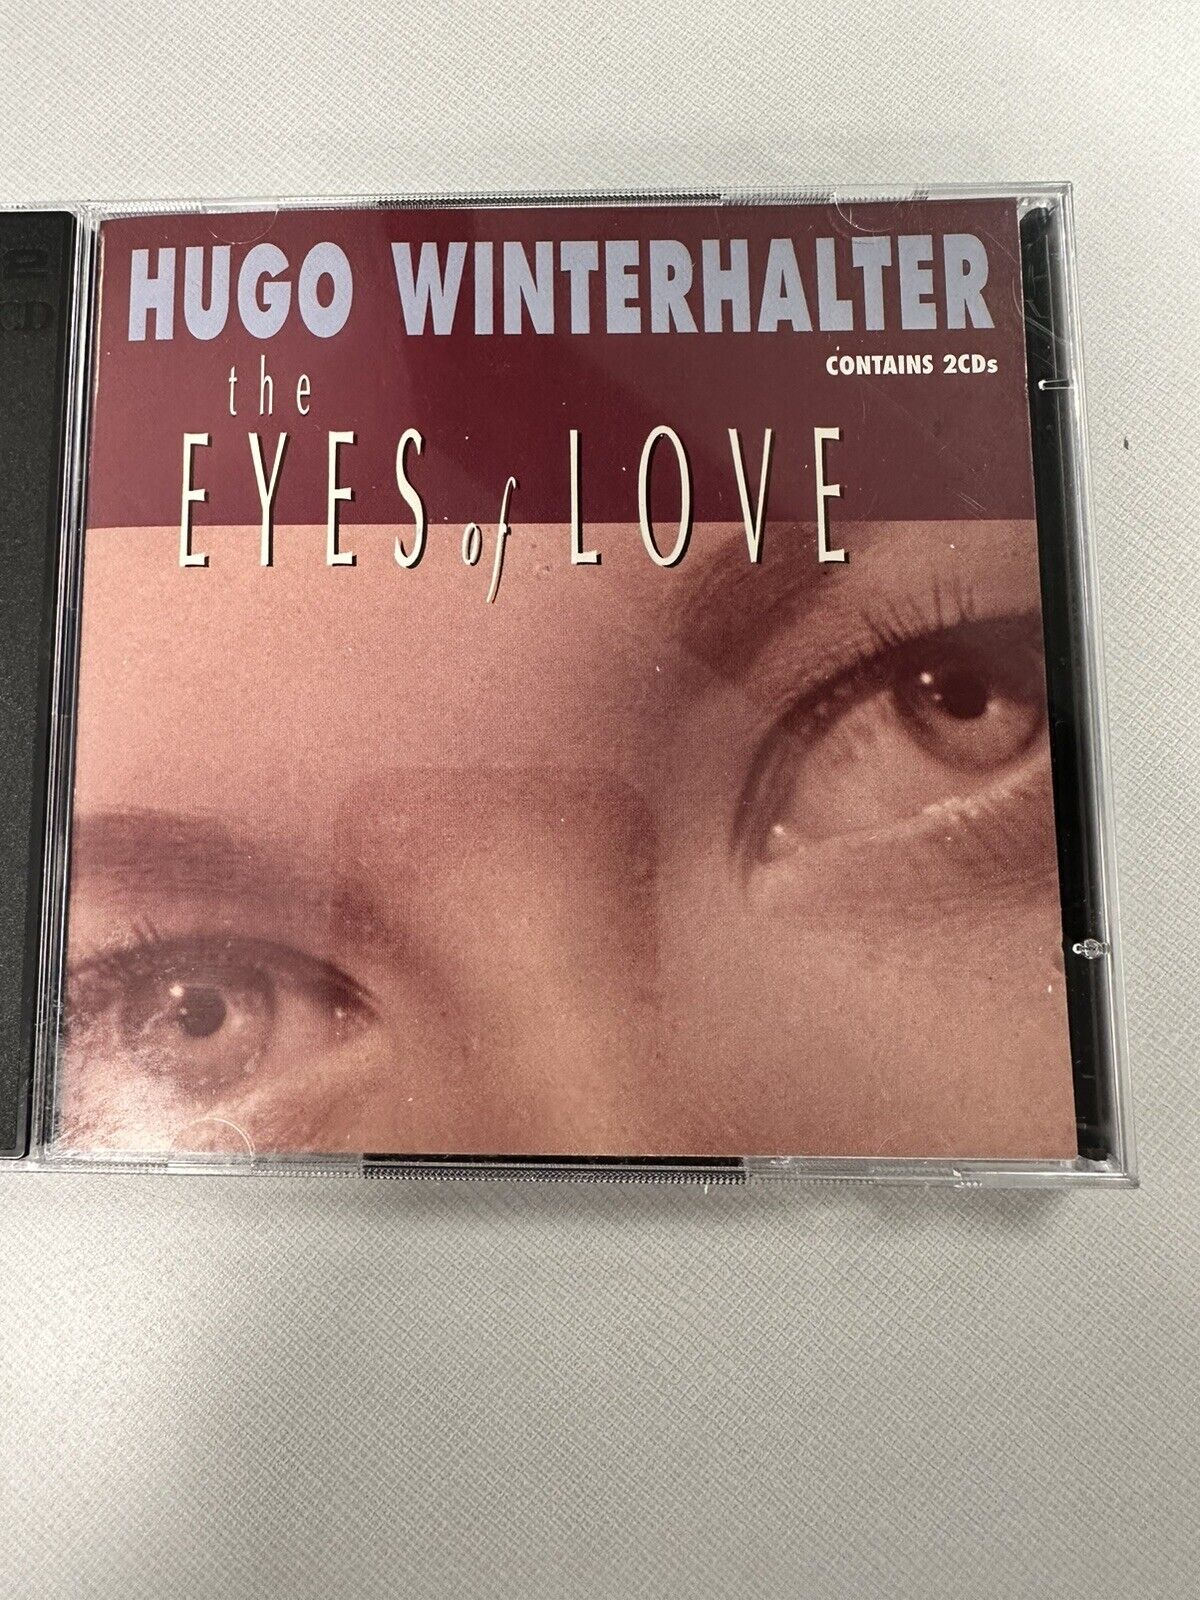 Hugo Winterhalter The Eyes Of Love 2 CD’s Pre-owned Very Good Condition